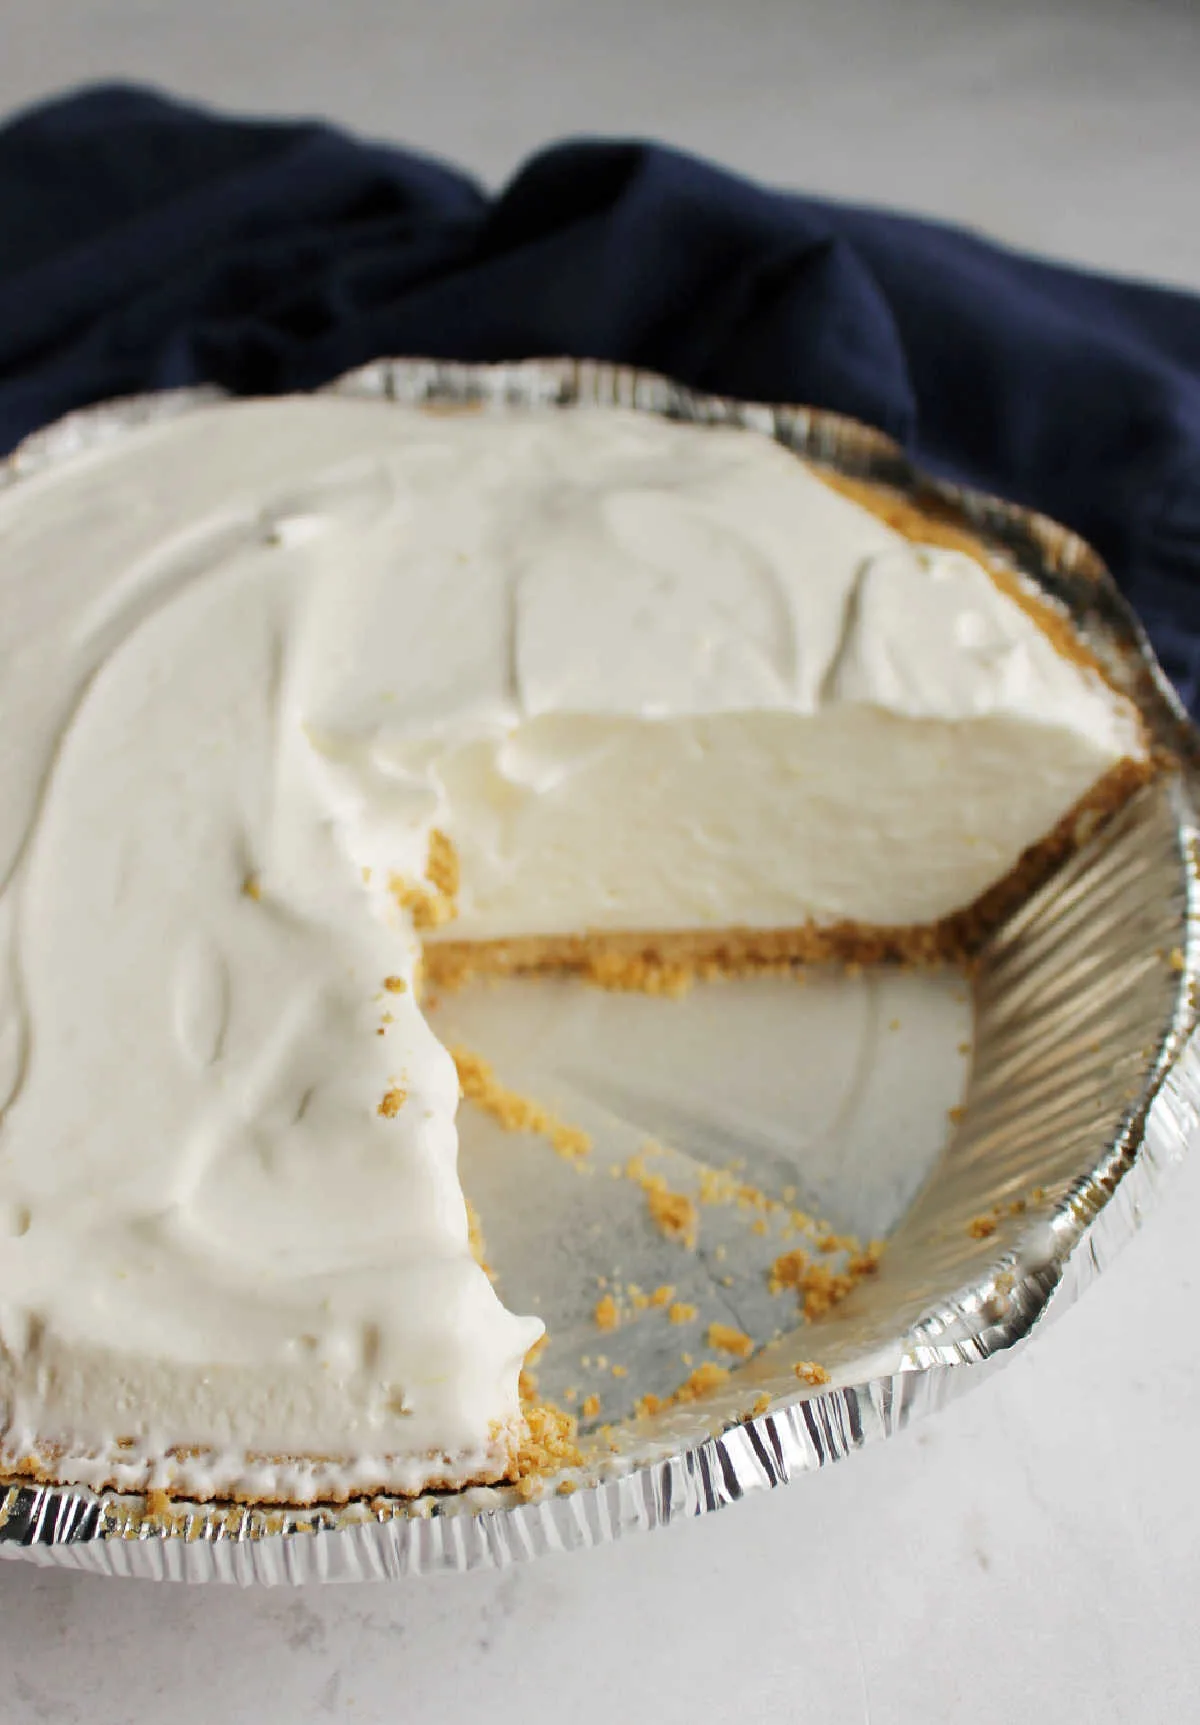 Creamy lemon pie in plate, missing a couple of slices showing the smooth lemon filling.